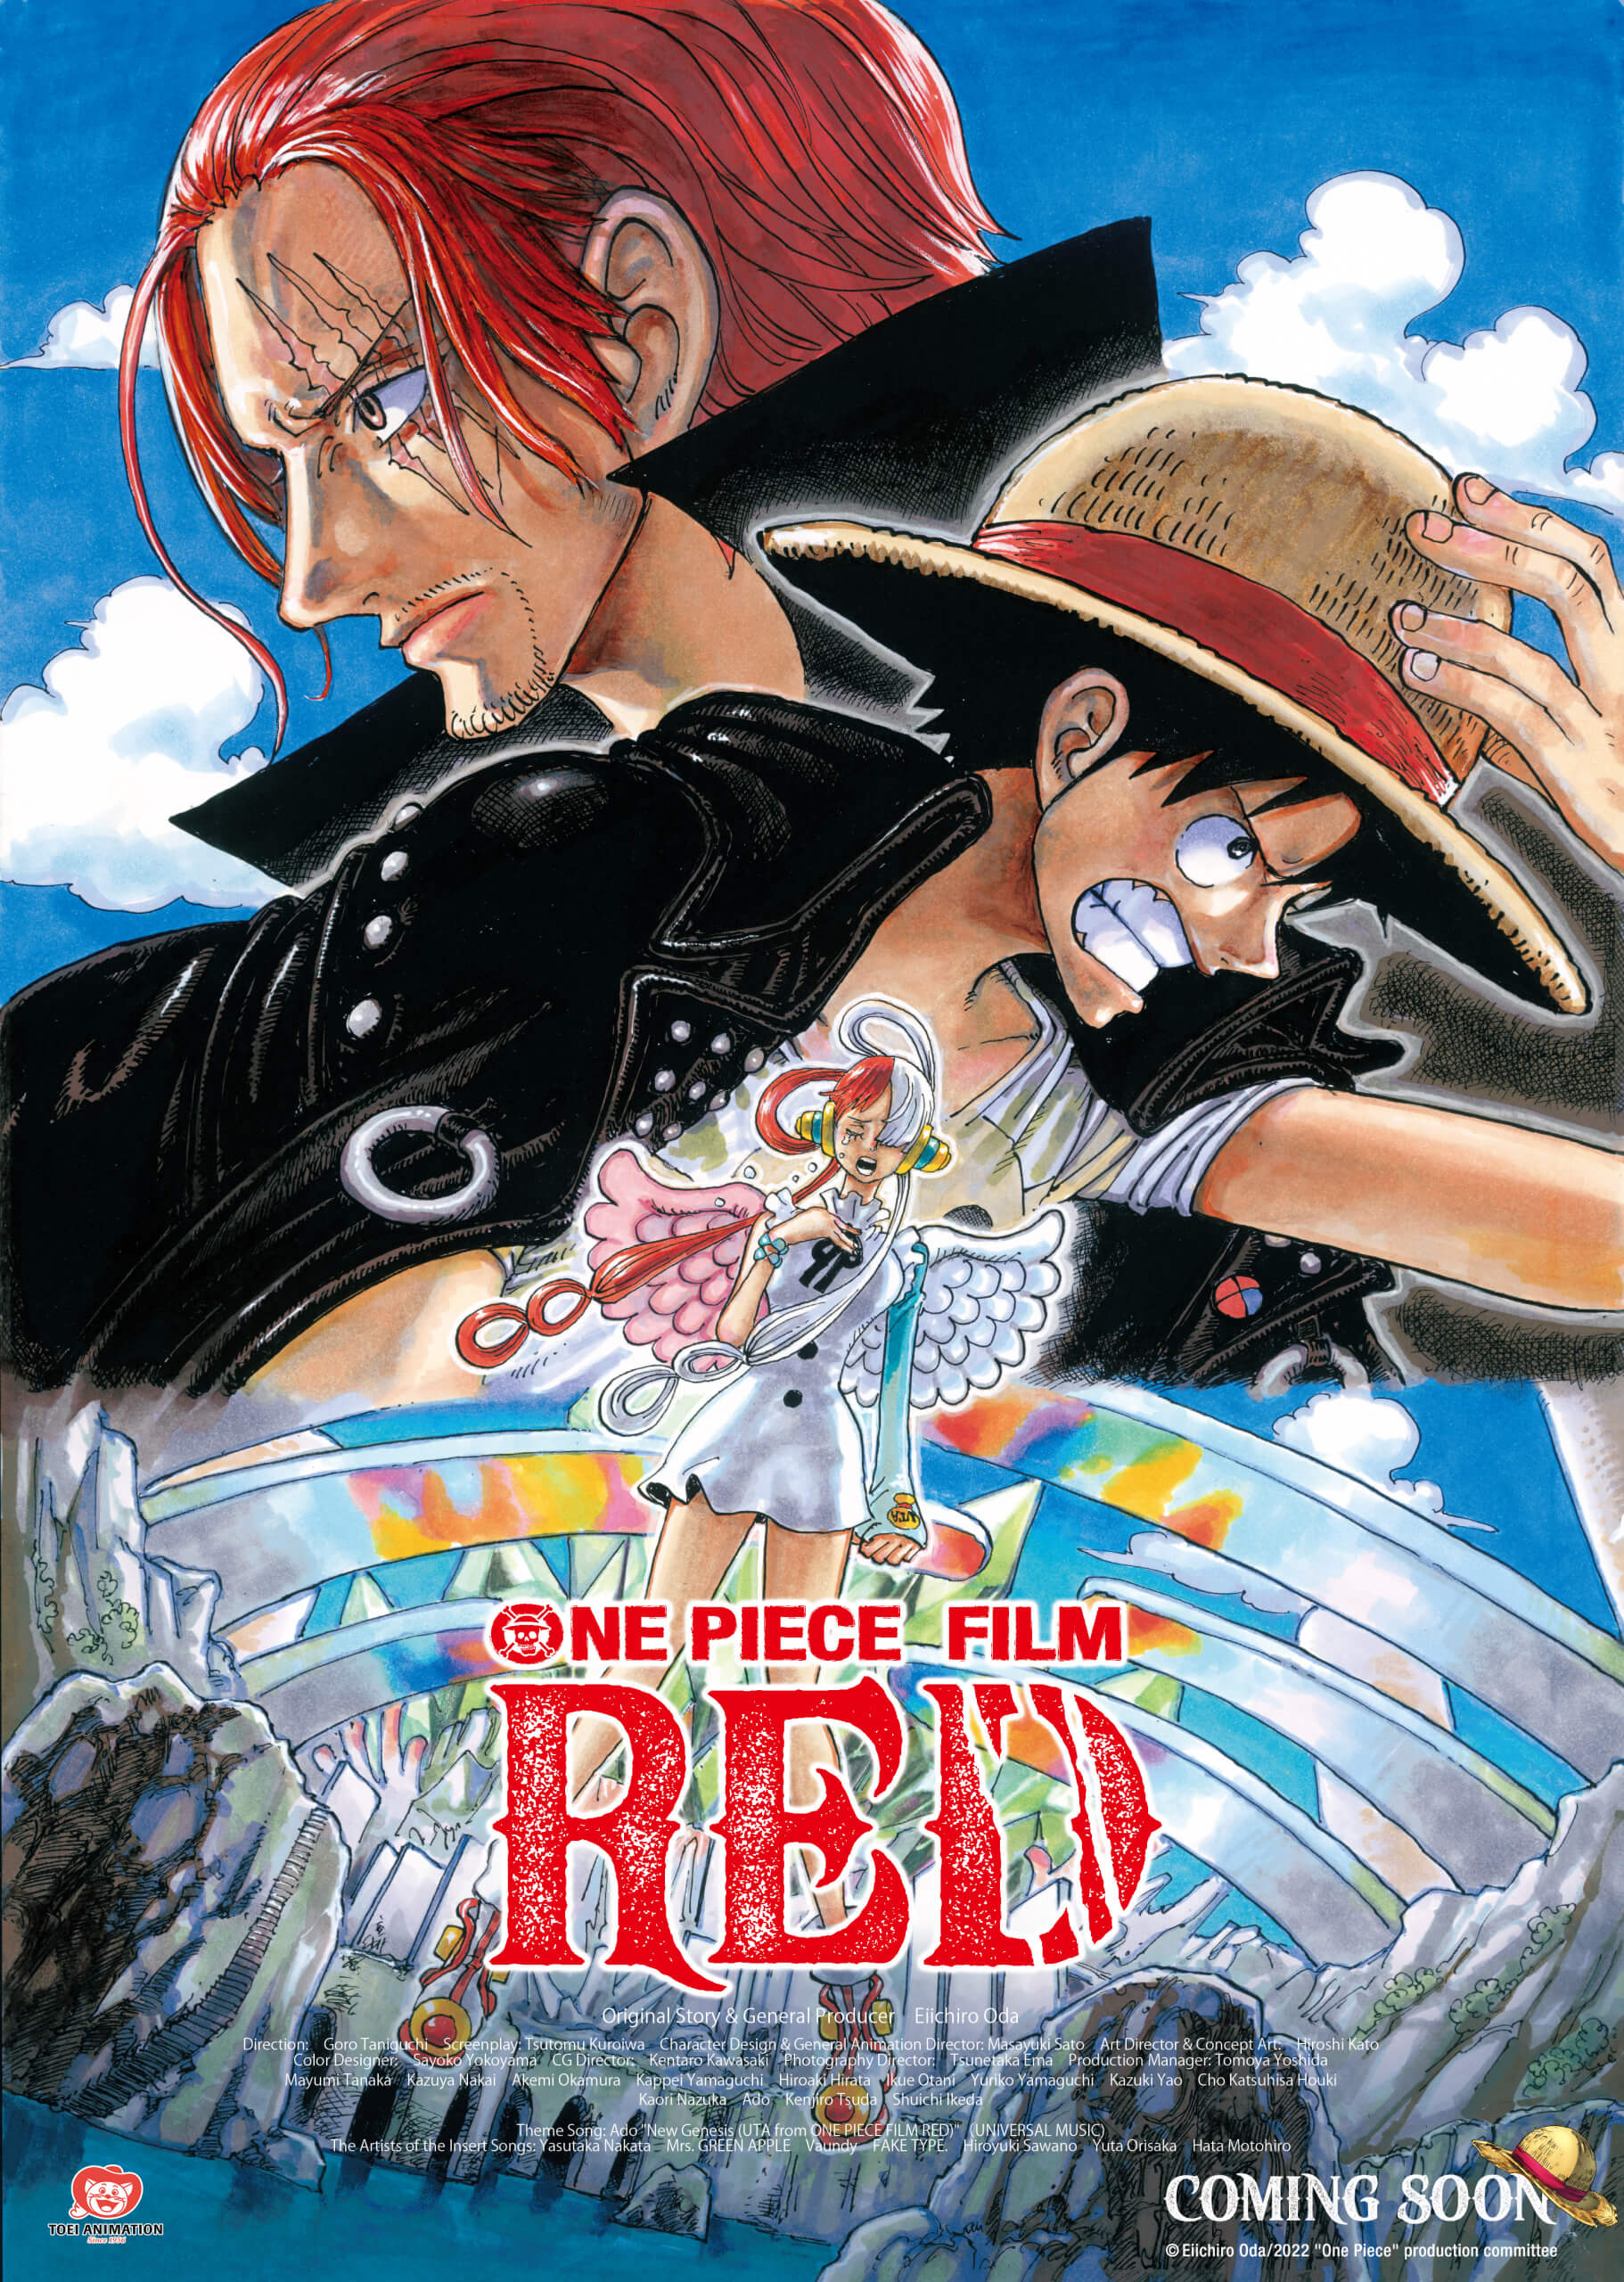 One Piece Film: Red ready to break more box office records in Europe 👾  COSMOCOVER - The best PR agency for video games in Europe!